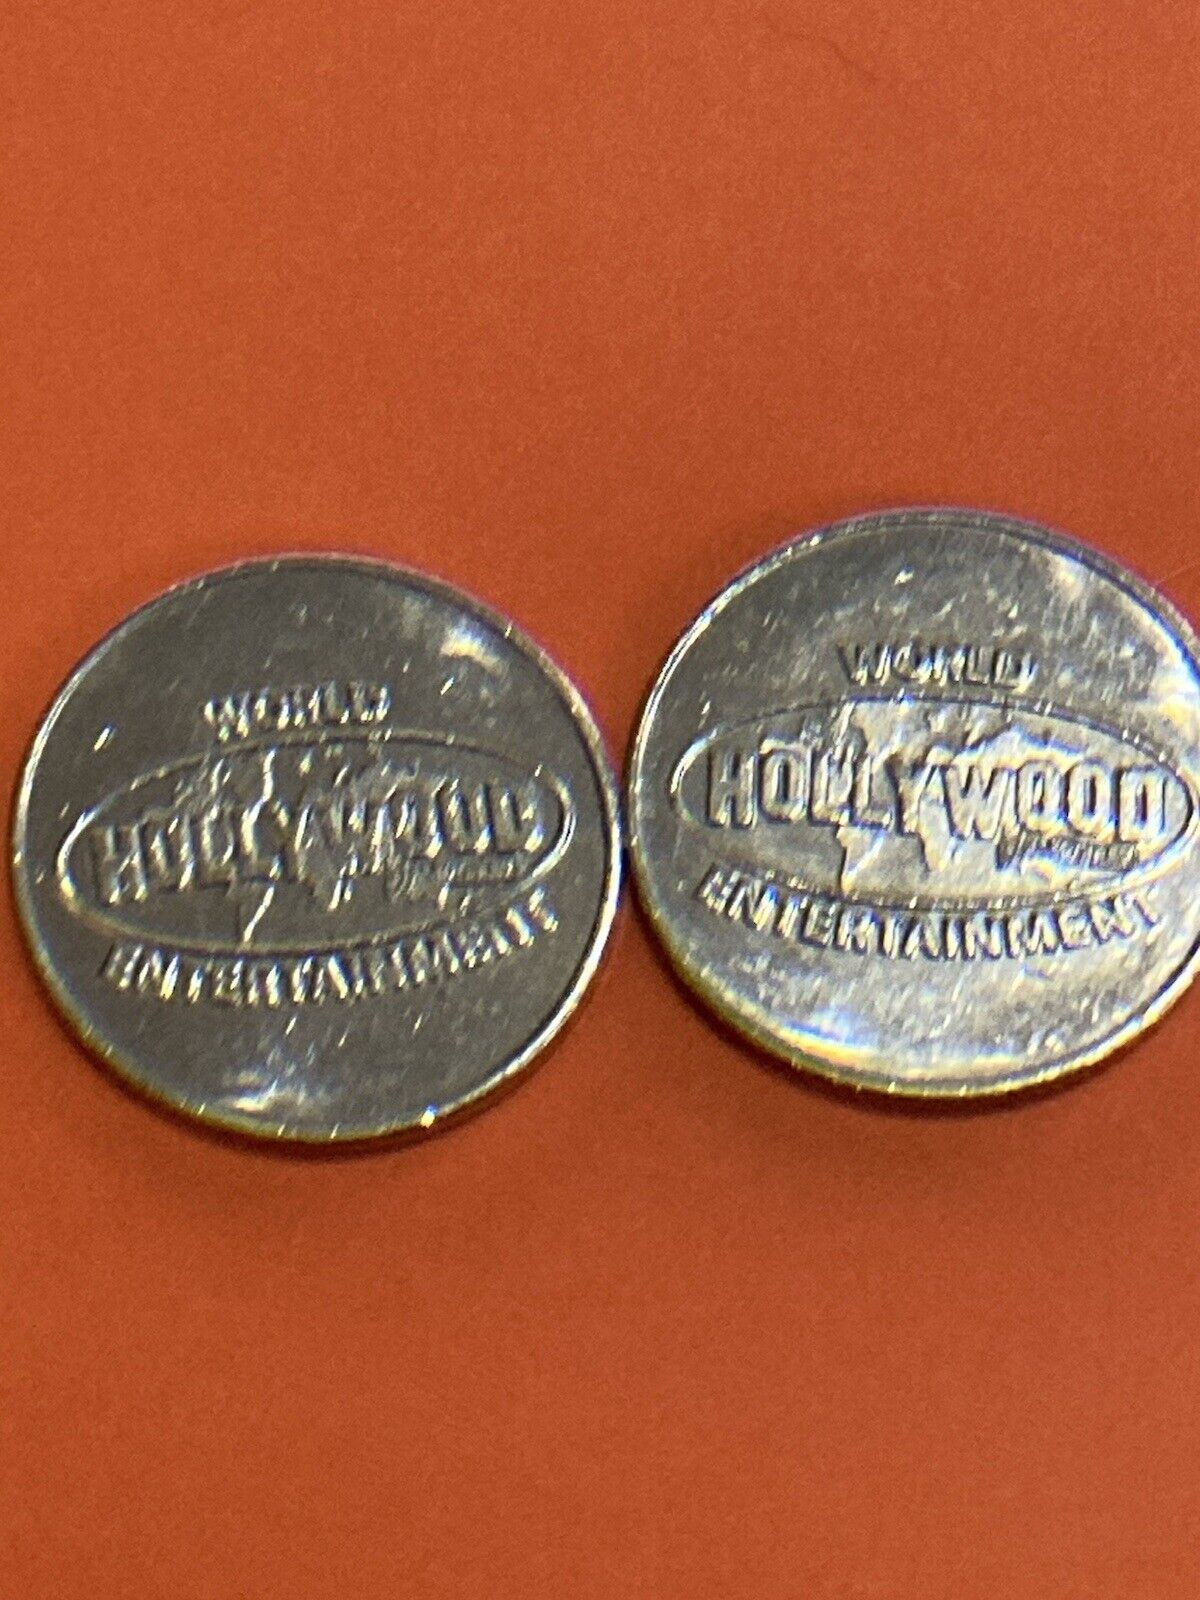 2 VINTAGE HOLLYWOOD VIDEO GAME ARCADE TOKENS - RARE - LOOK